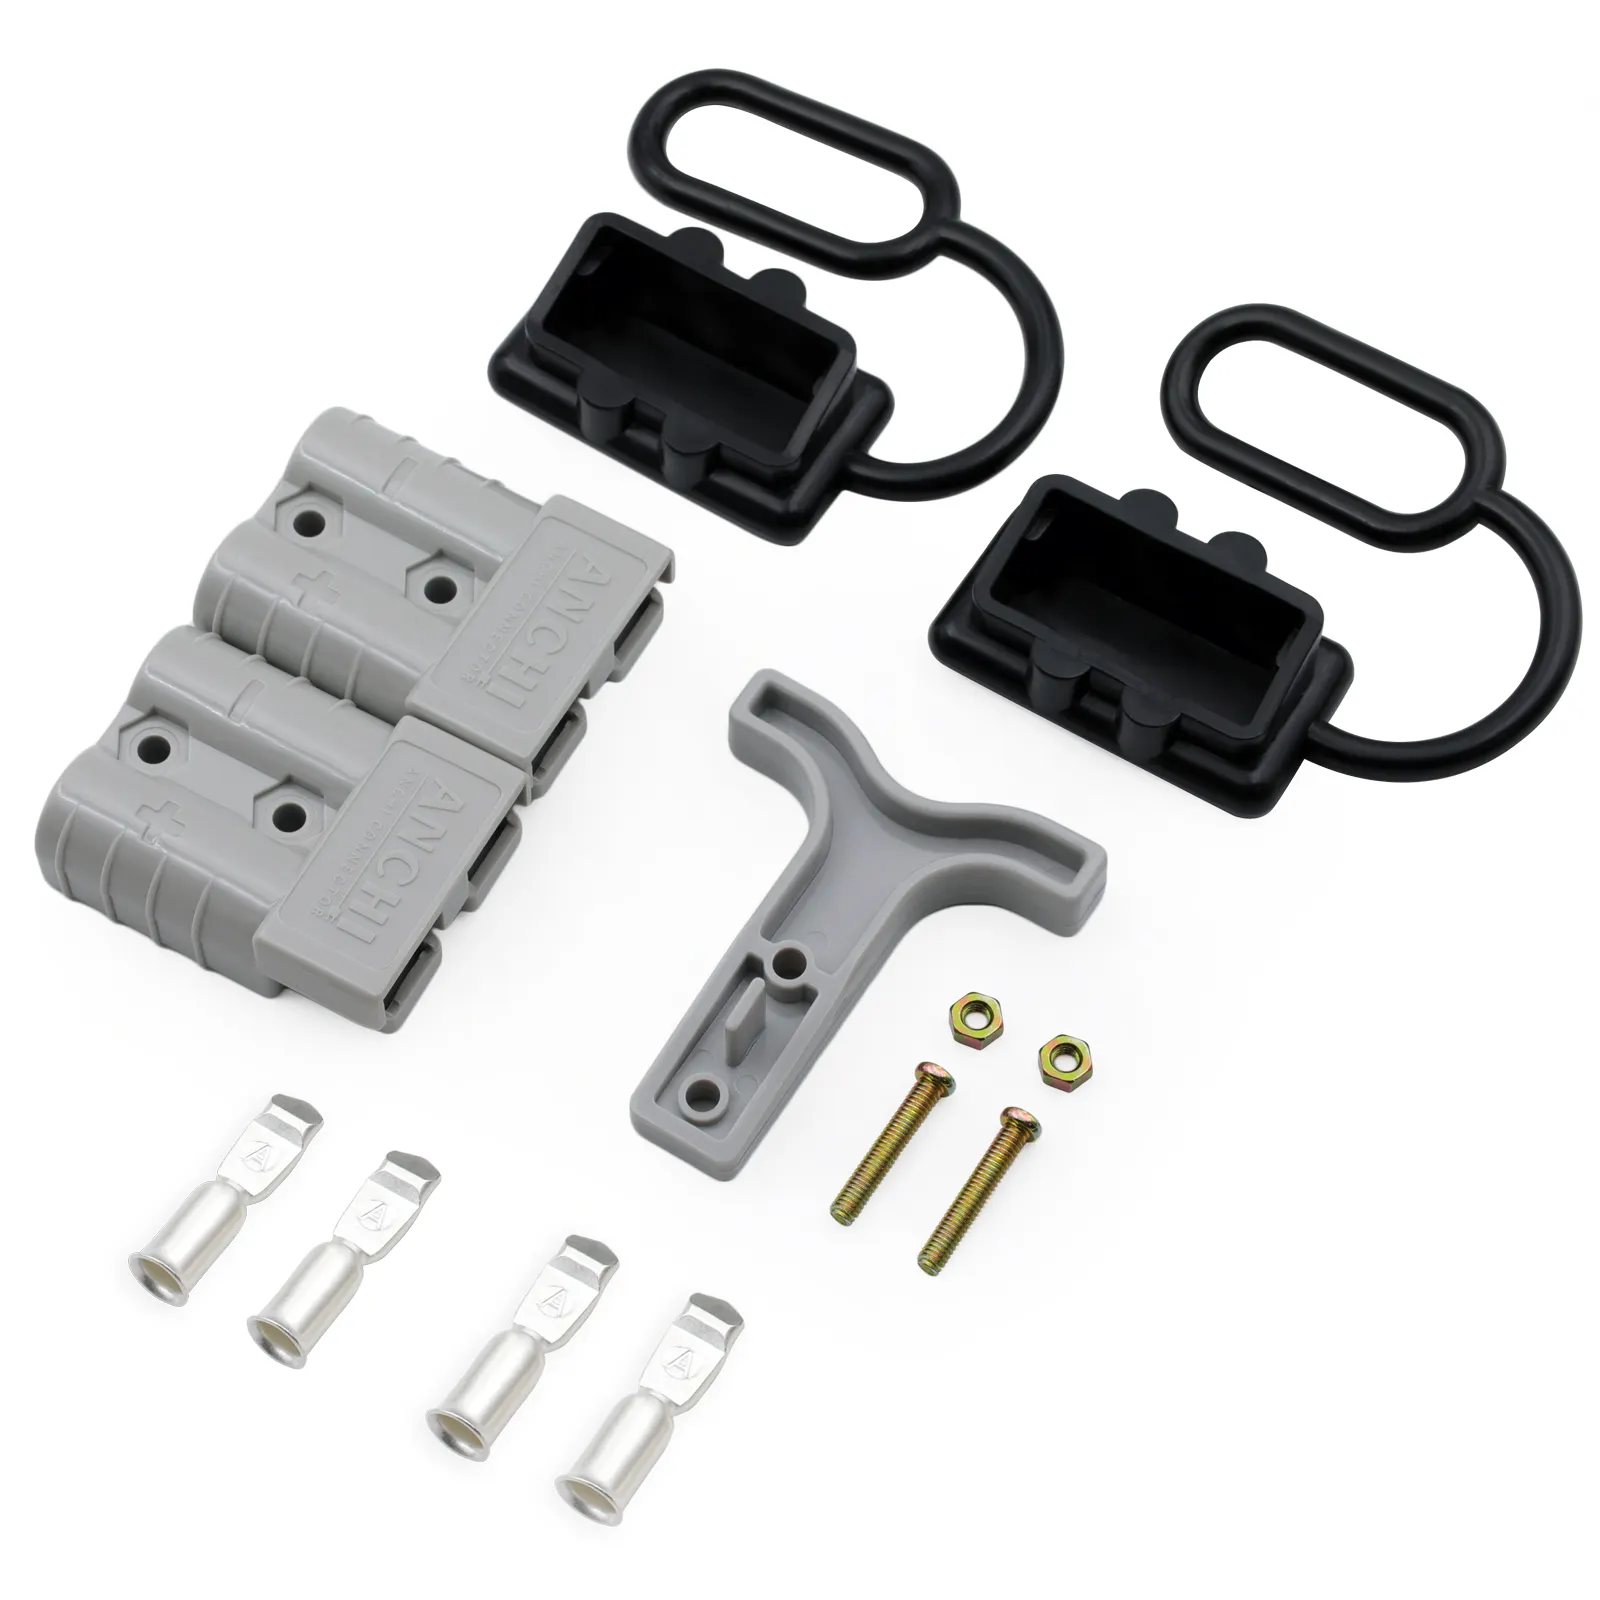 Anderson Style Plug 50A electric forklift 2 connector, 1 T-shaped disconnect auxiliary handle and 2 dust cover